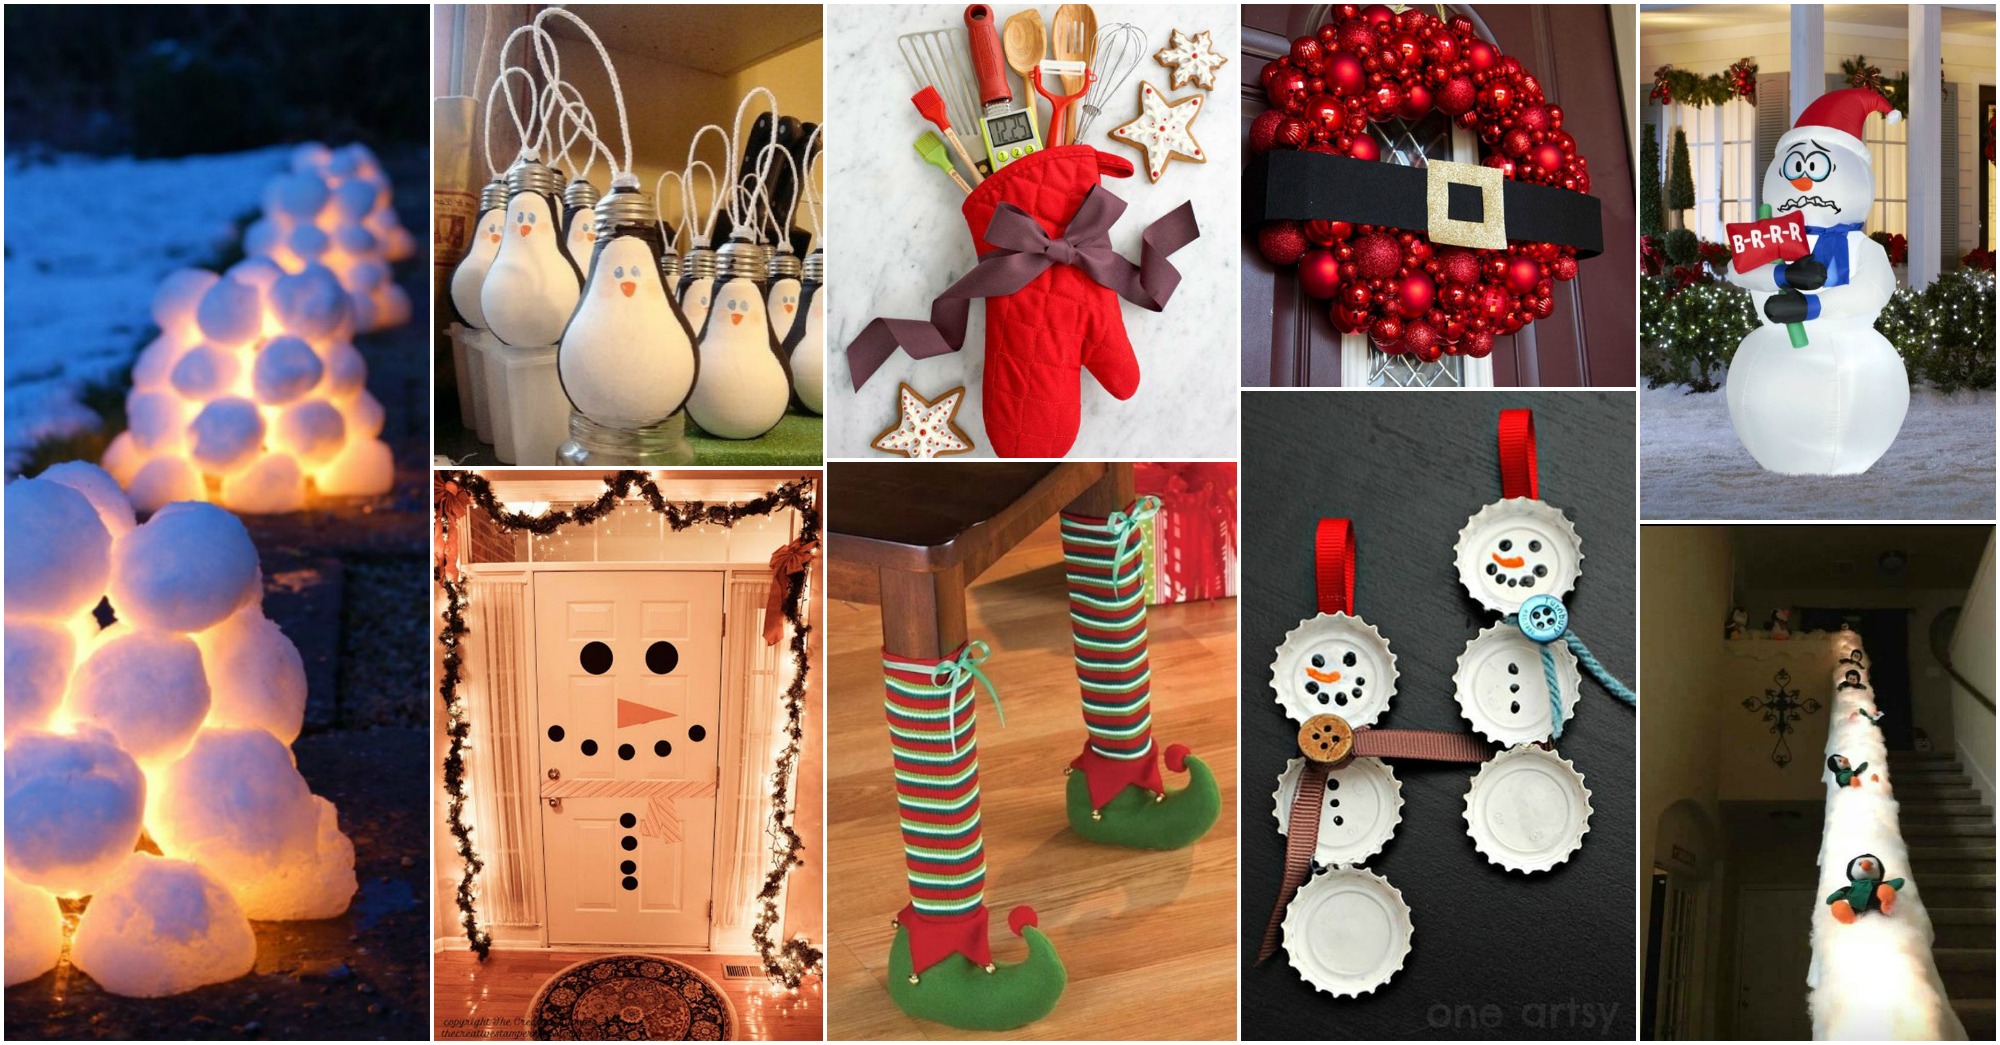 Diy Funny Christmas Decor Ideas That Will Make You Cheerful for The Most Amazing and Interesting funny christmas home decorations for Home